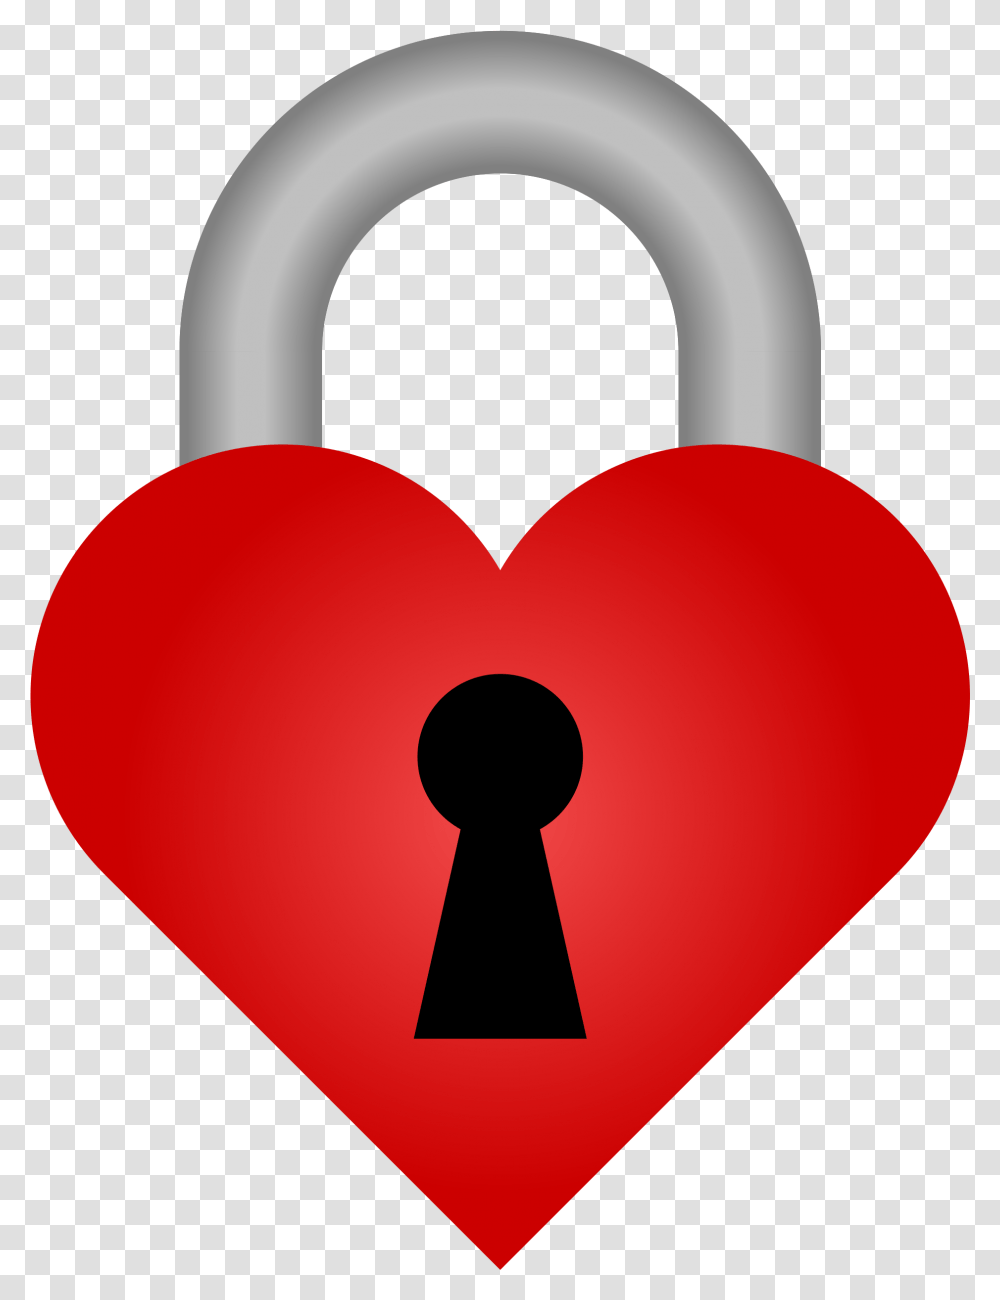 Padlock Drawing Fancy Clipart Free Heart With A Lock, Balloon, Security, Combination Lock Transparent Png